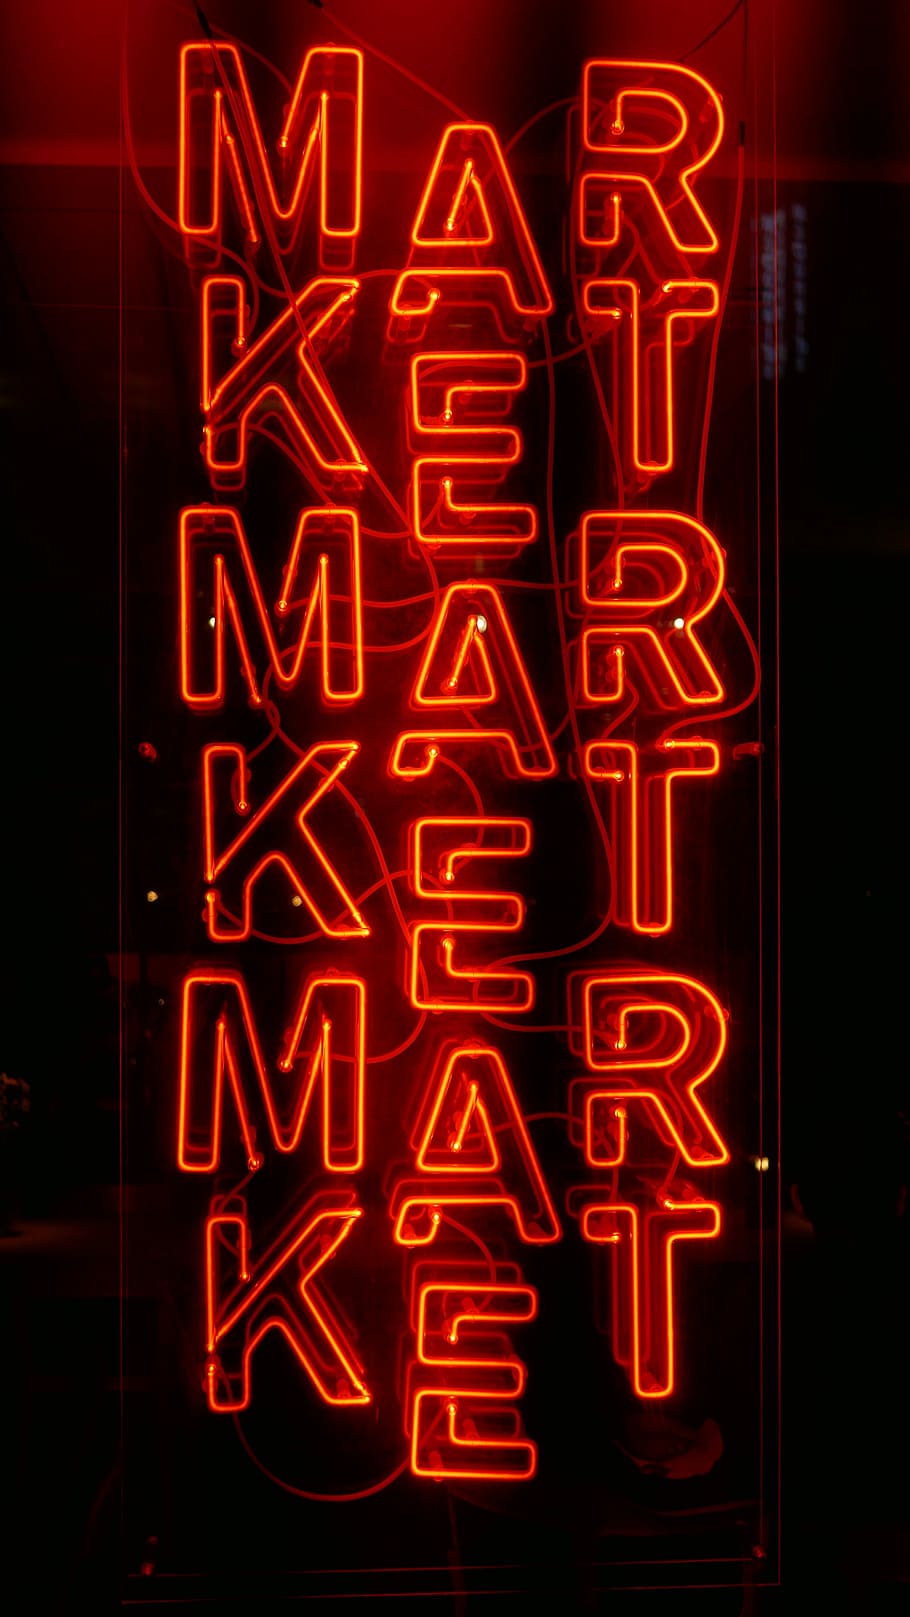 red market sign, red neon light signage, text, type, illuminated